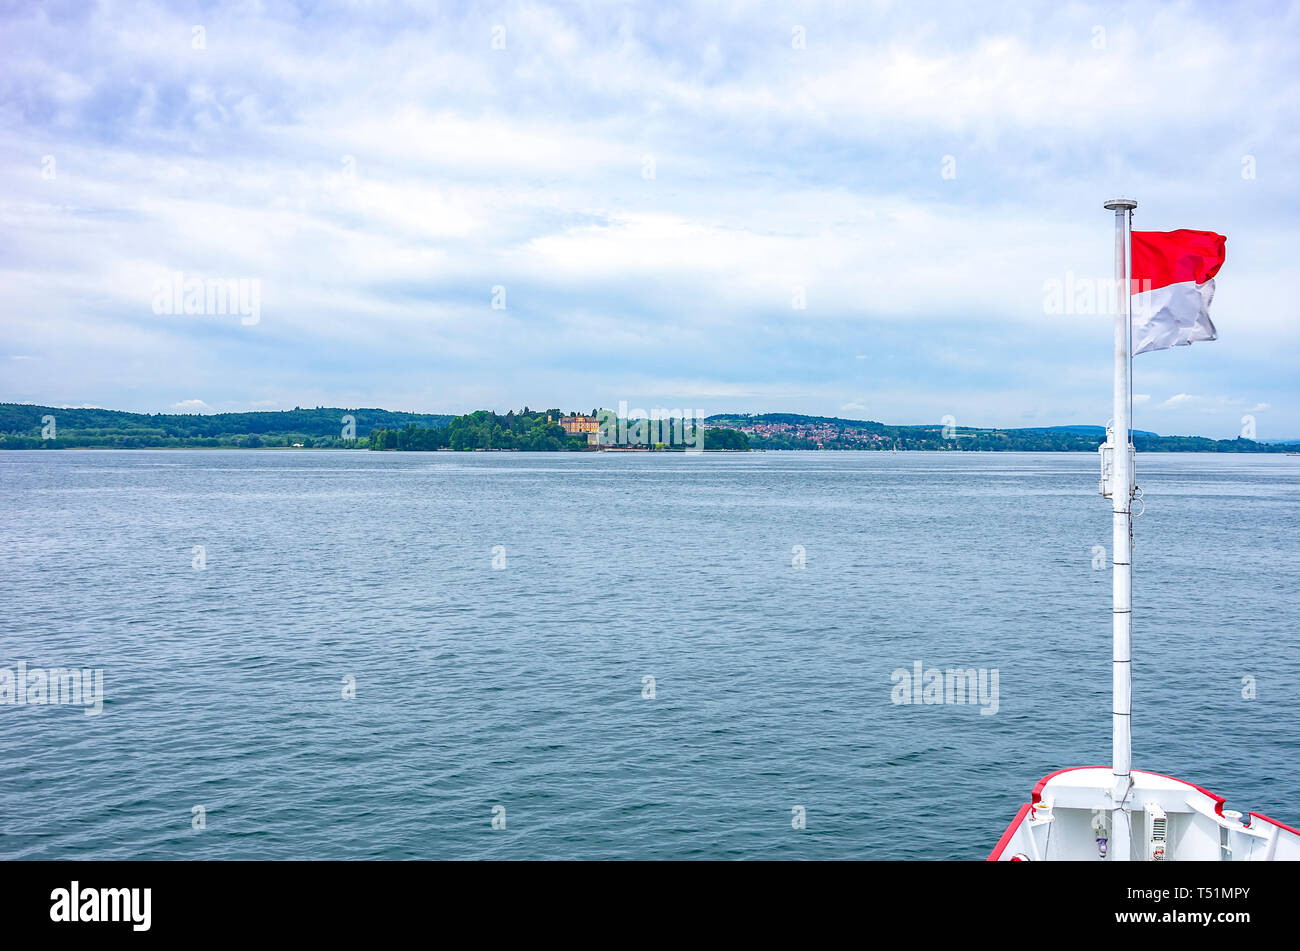 An excursion boat is on course to the Flower Island Mainau in Lake Constance, Germany, Europe. Stock Photo